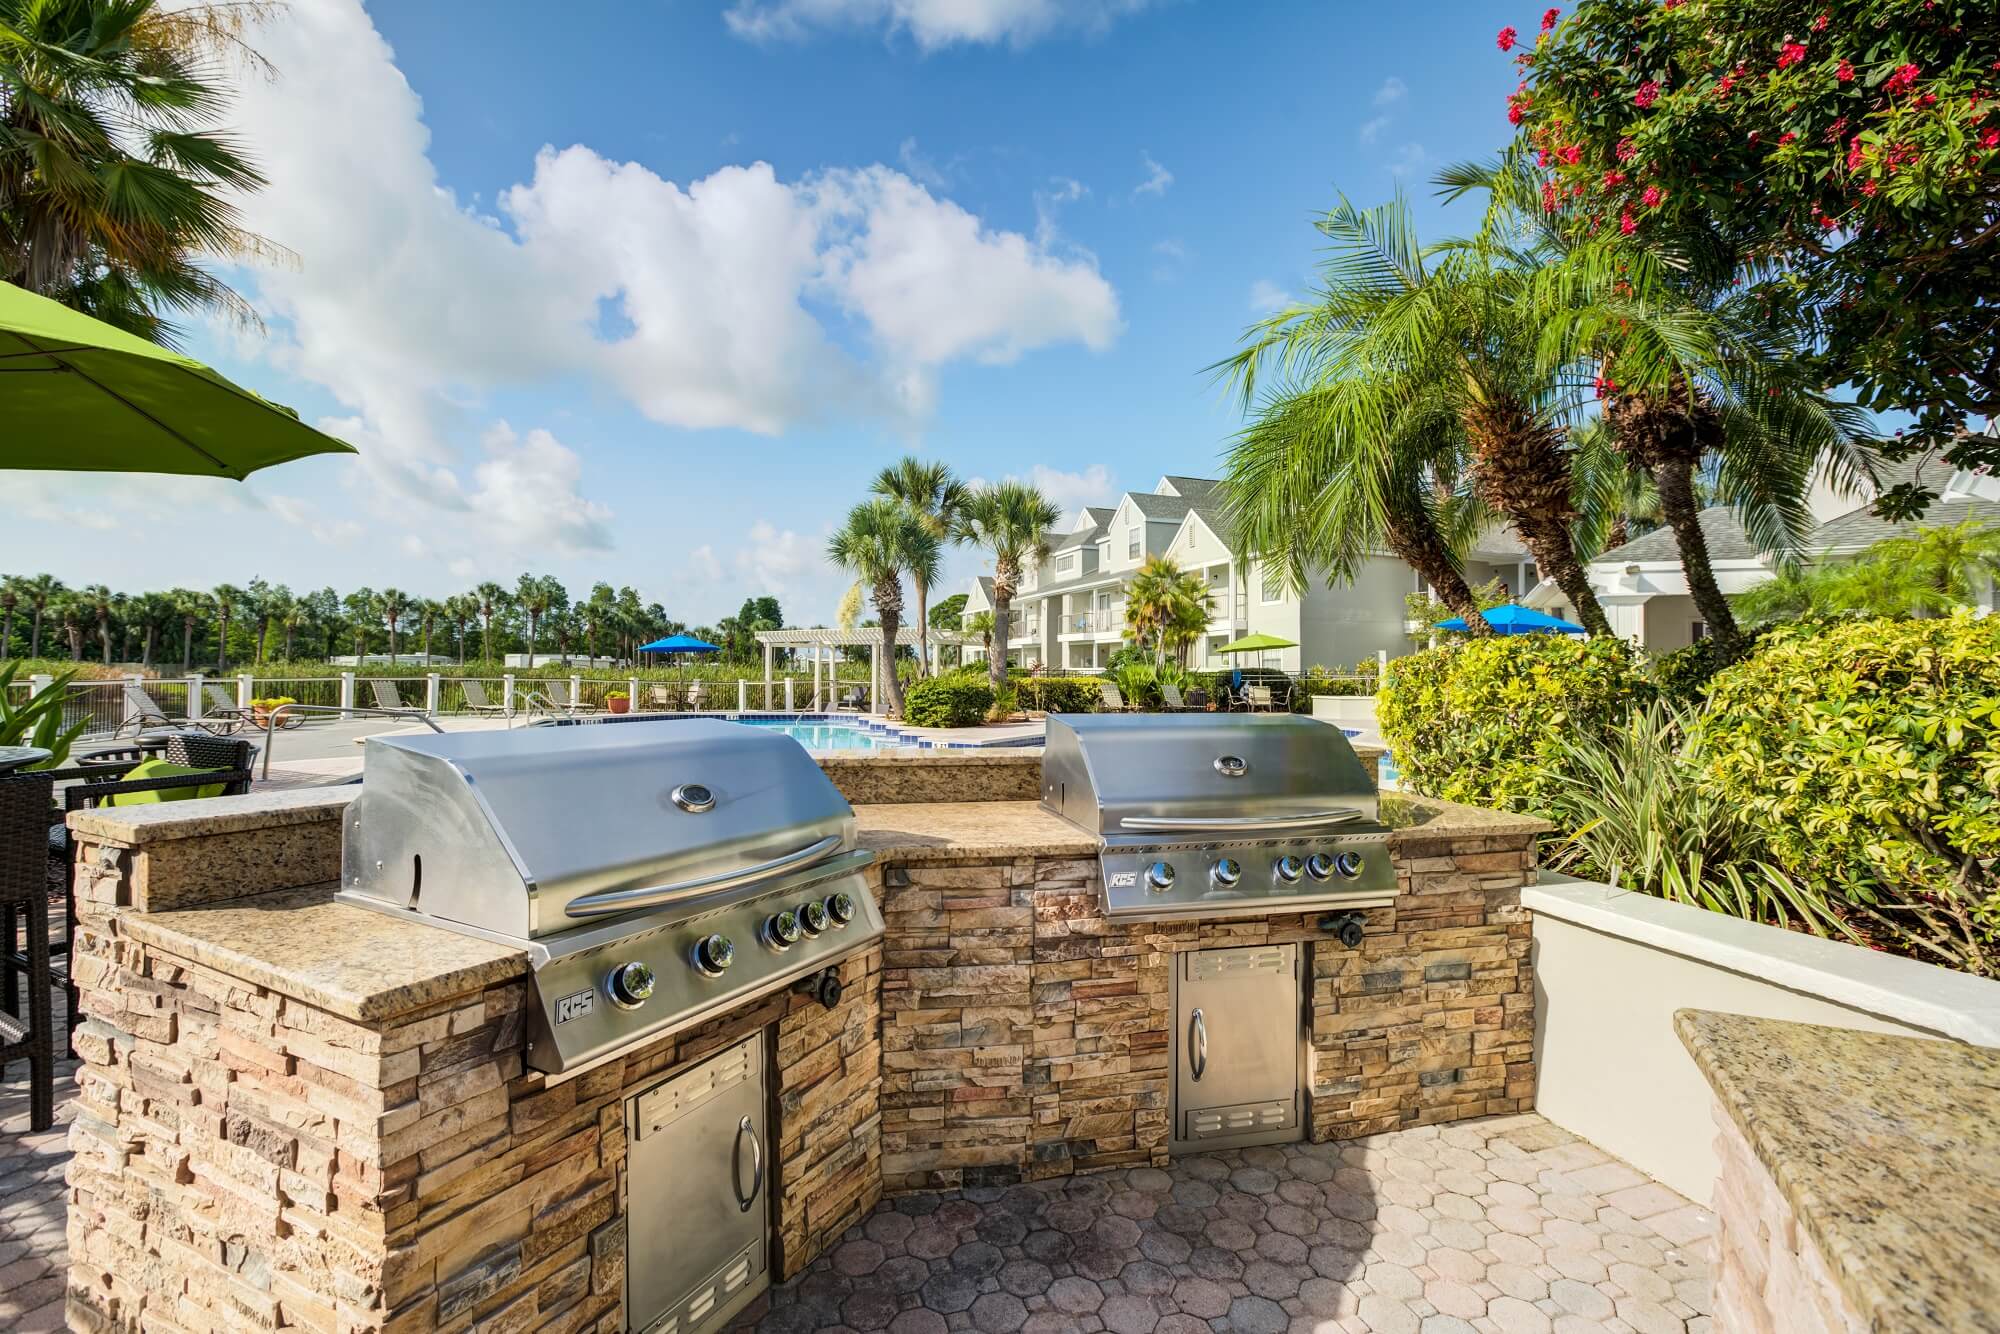 two 4 burner grills with stone countertops near the pool.